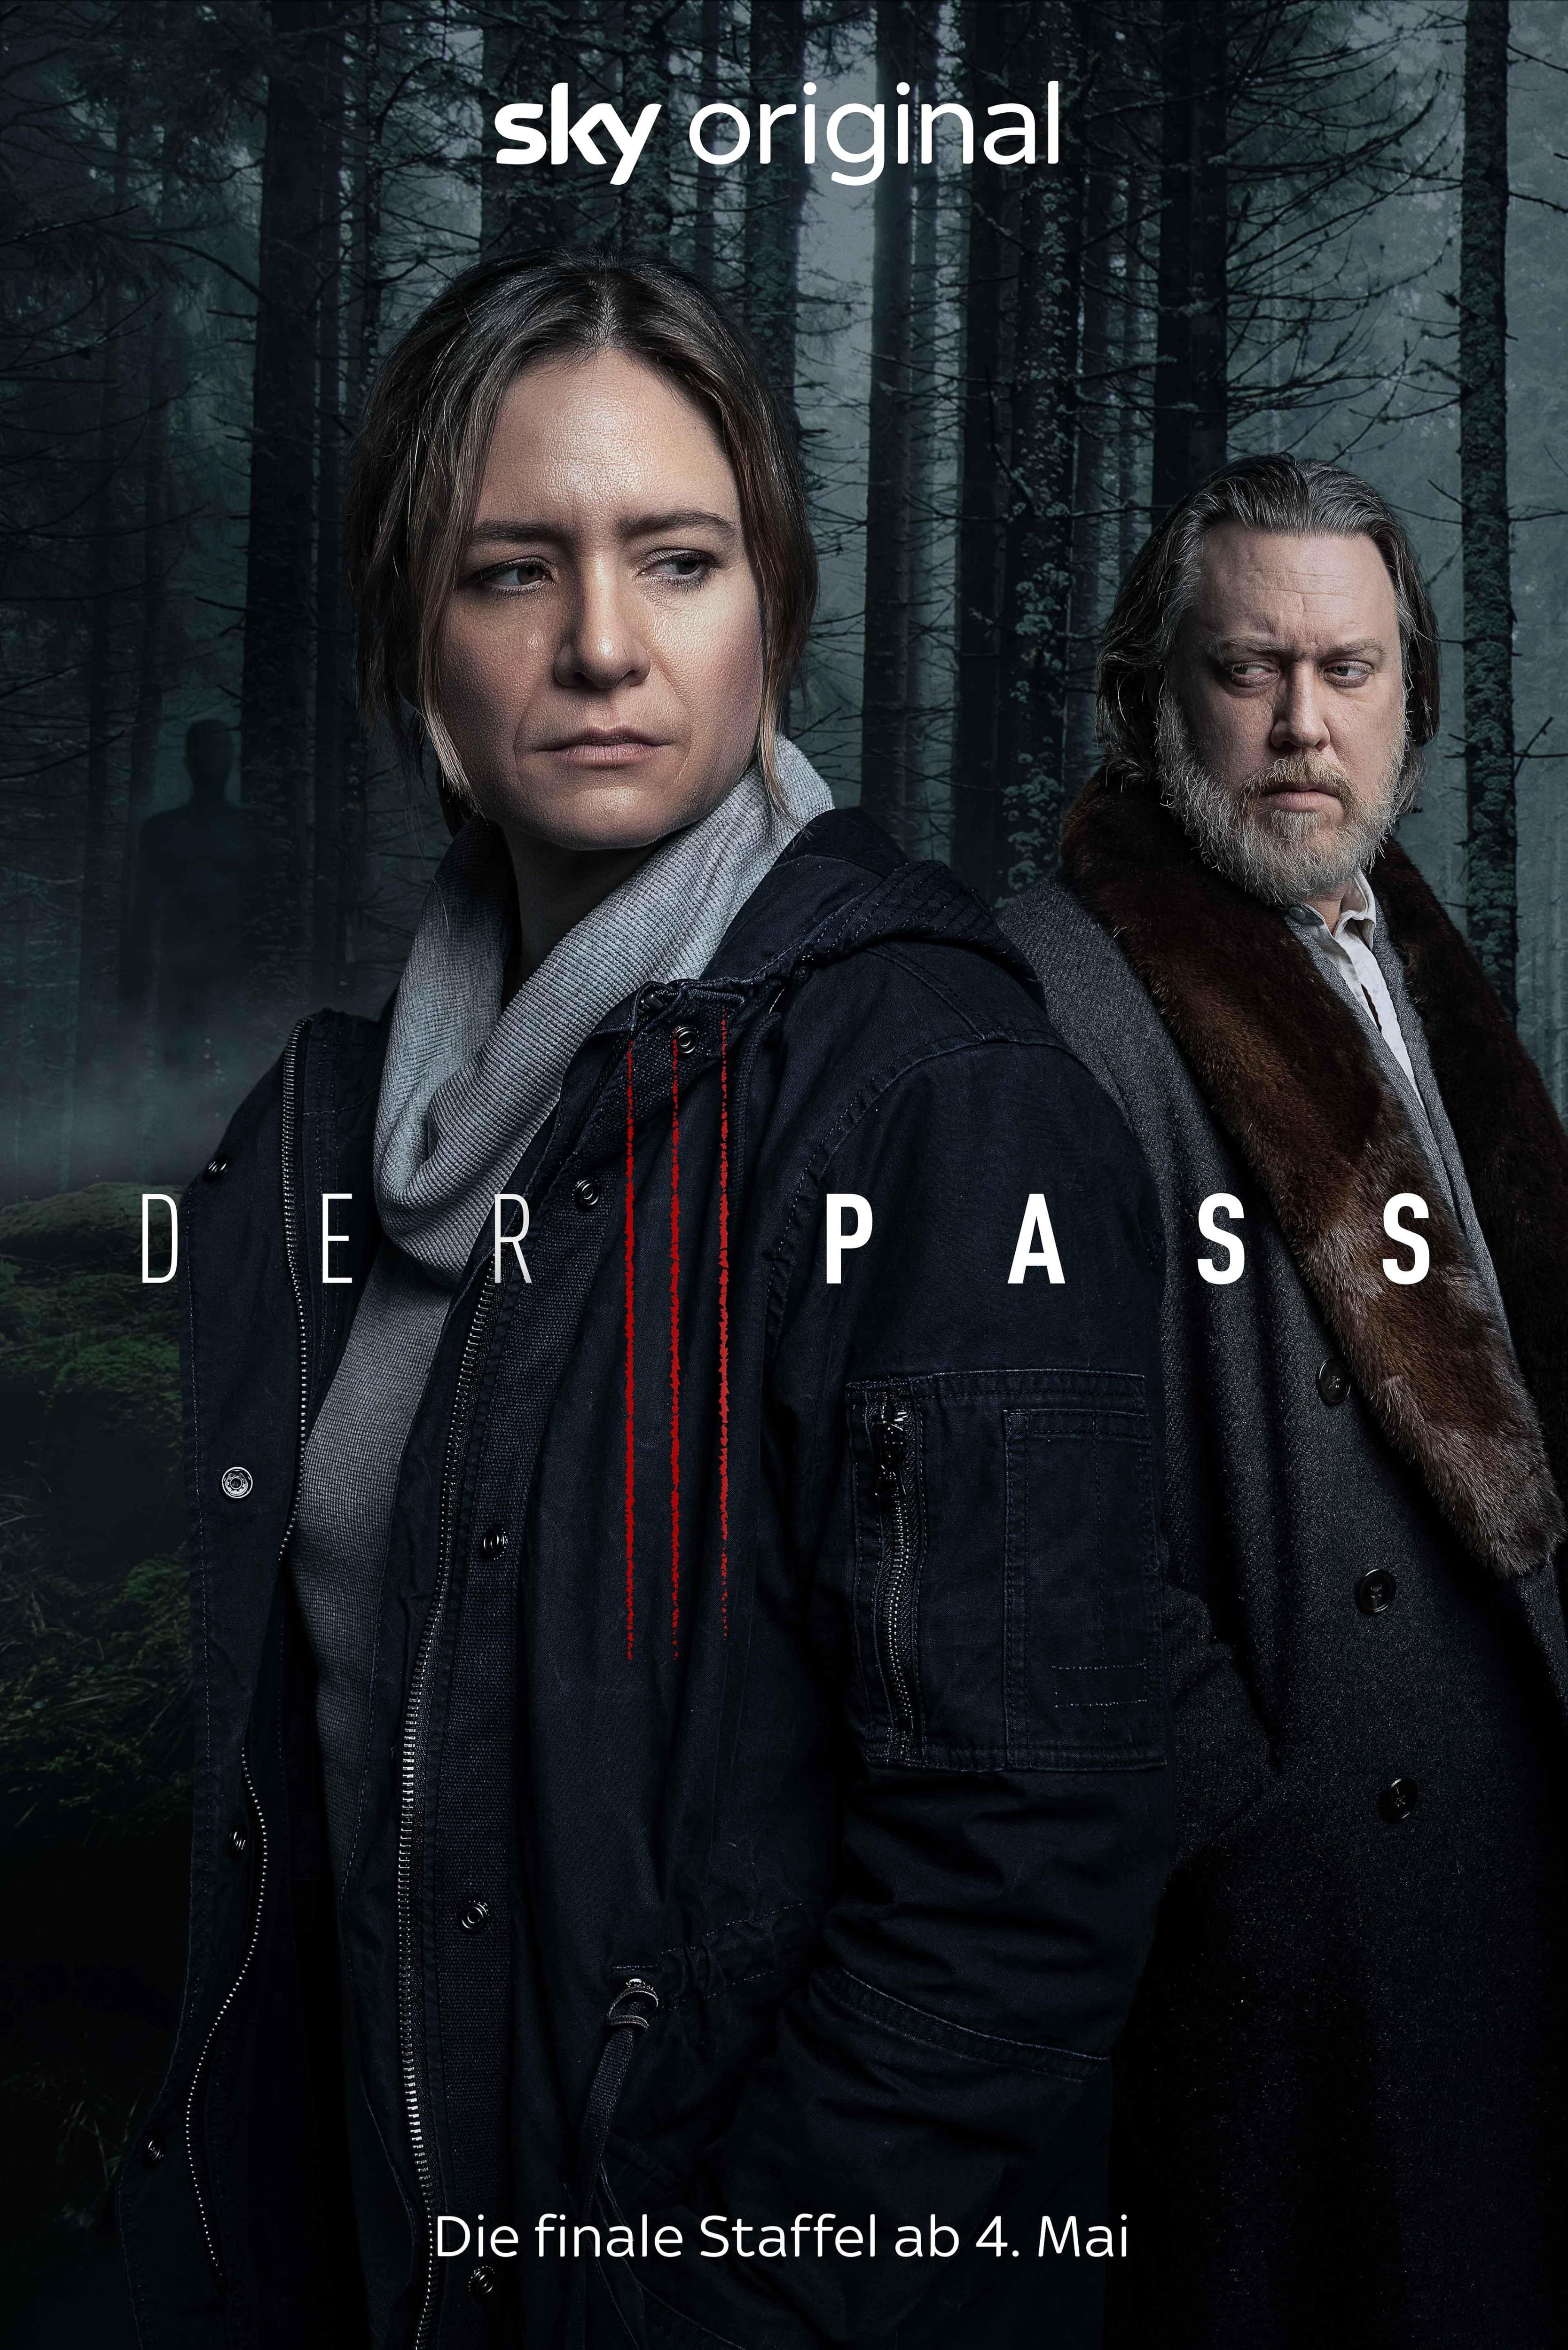 Der Pass (2019) Season 2 Hindi Dubbed Complete Series download full movie